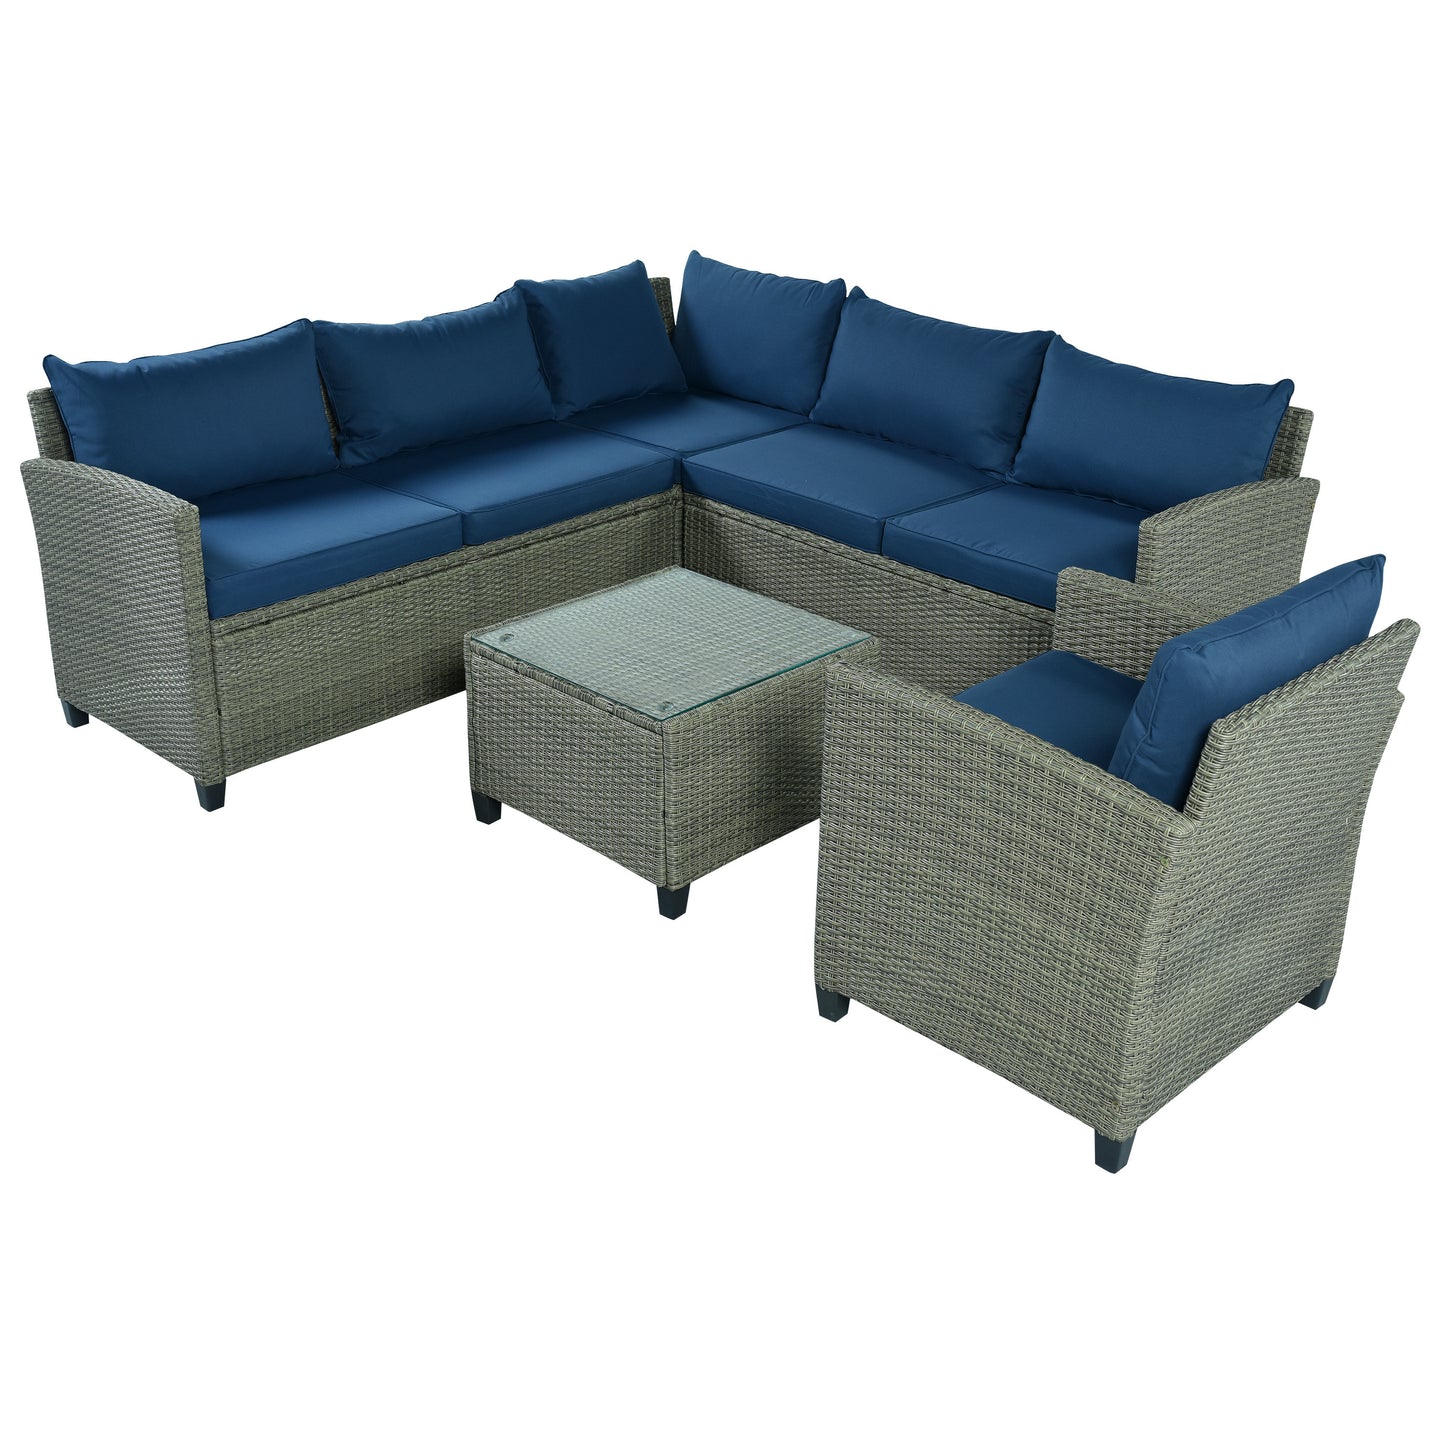 U_STYLE Patio Furniture Set, 5 Piece Outdoor Conversation Set，with Coffee Table, Cushions and Single Chair